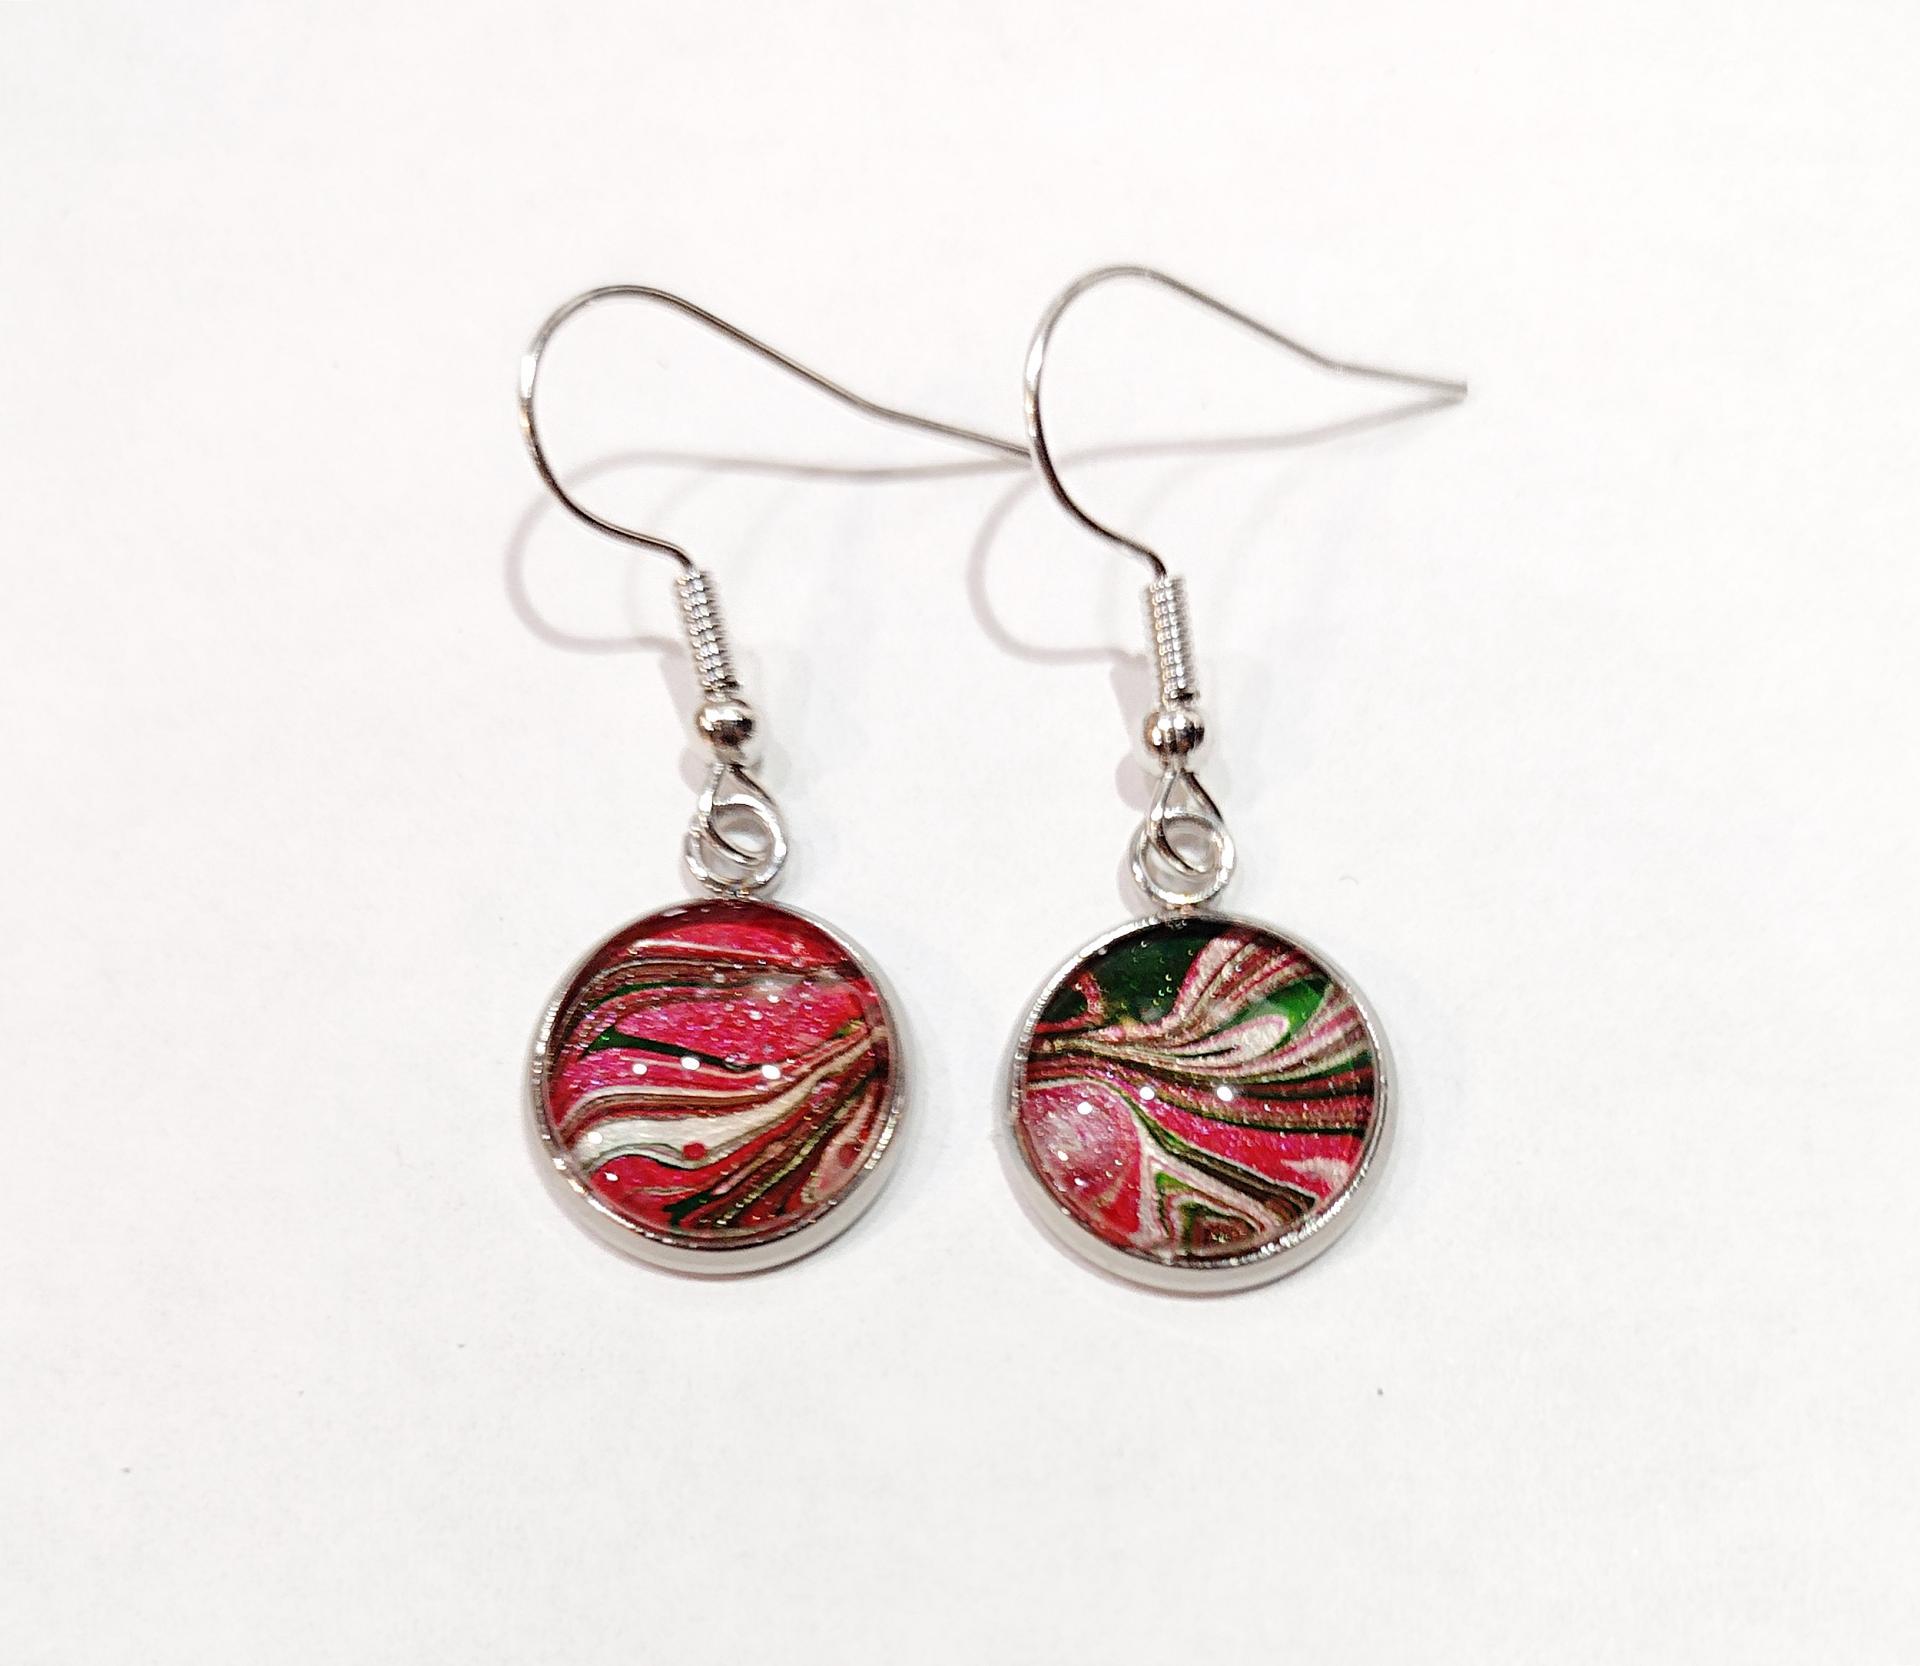 Painted Earrings, Red, Green, and Silver, Holiday Jewelry